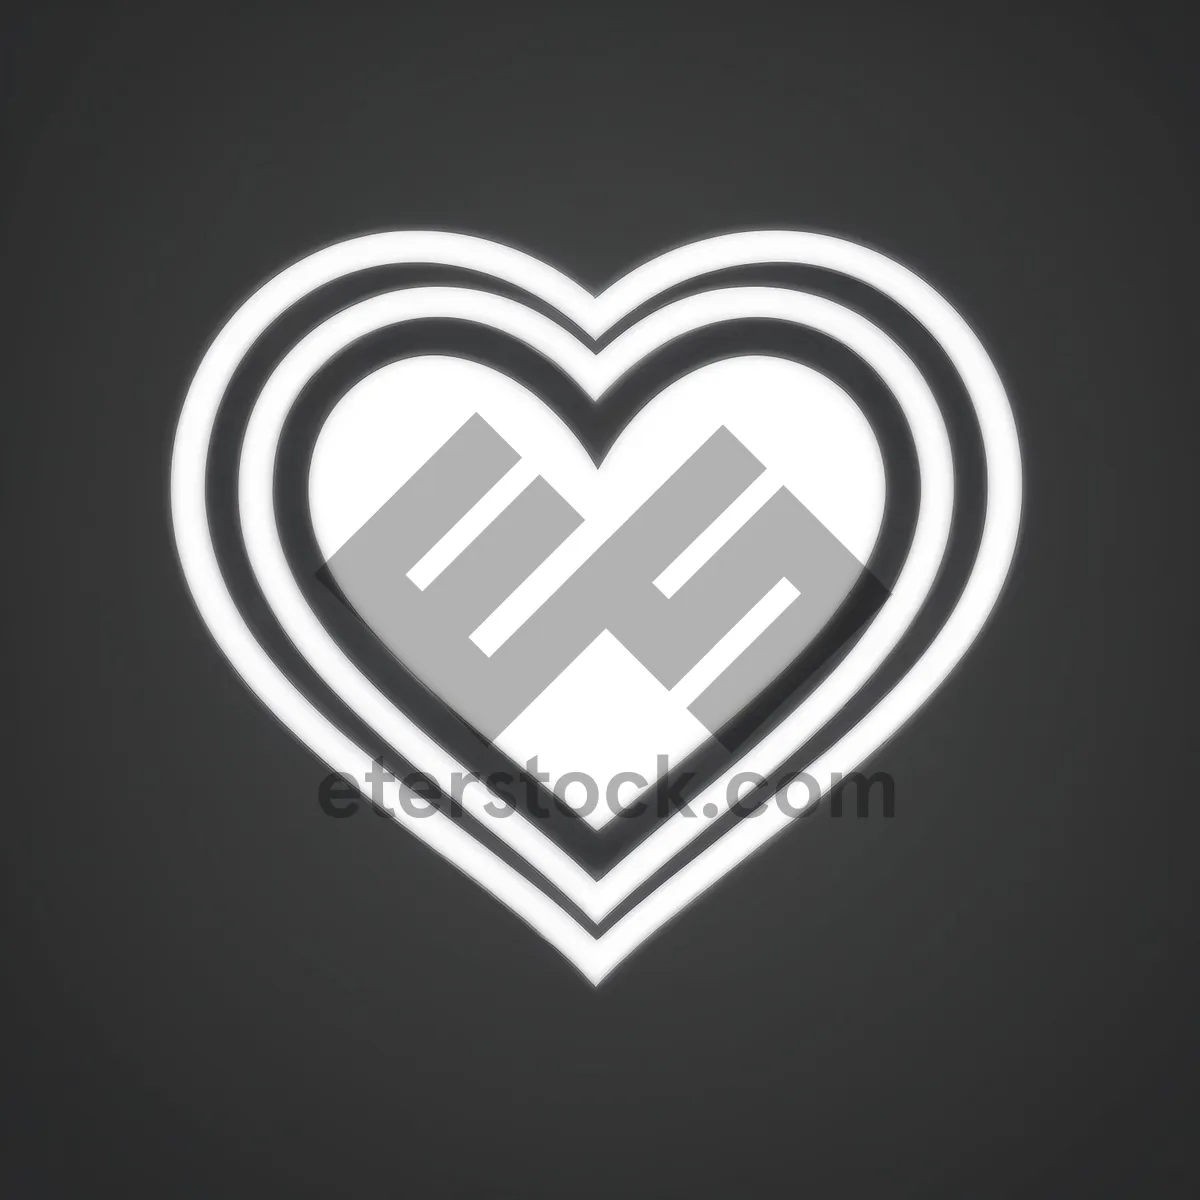 Picture of Heartful Gem Icon Set Design: Love-inspired symbol buttons for web art.